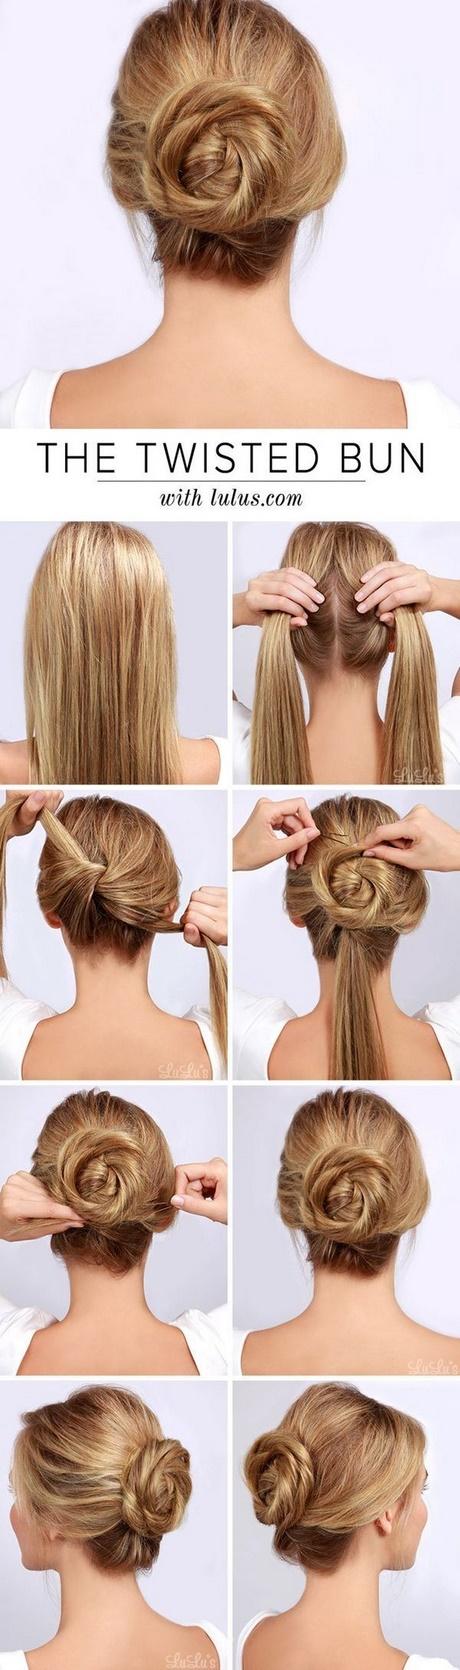 Simple hairstyles for everyday long hair simple-hairstyles-for-everyday-long-hair-21_7